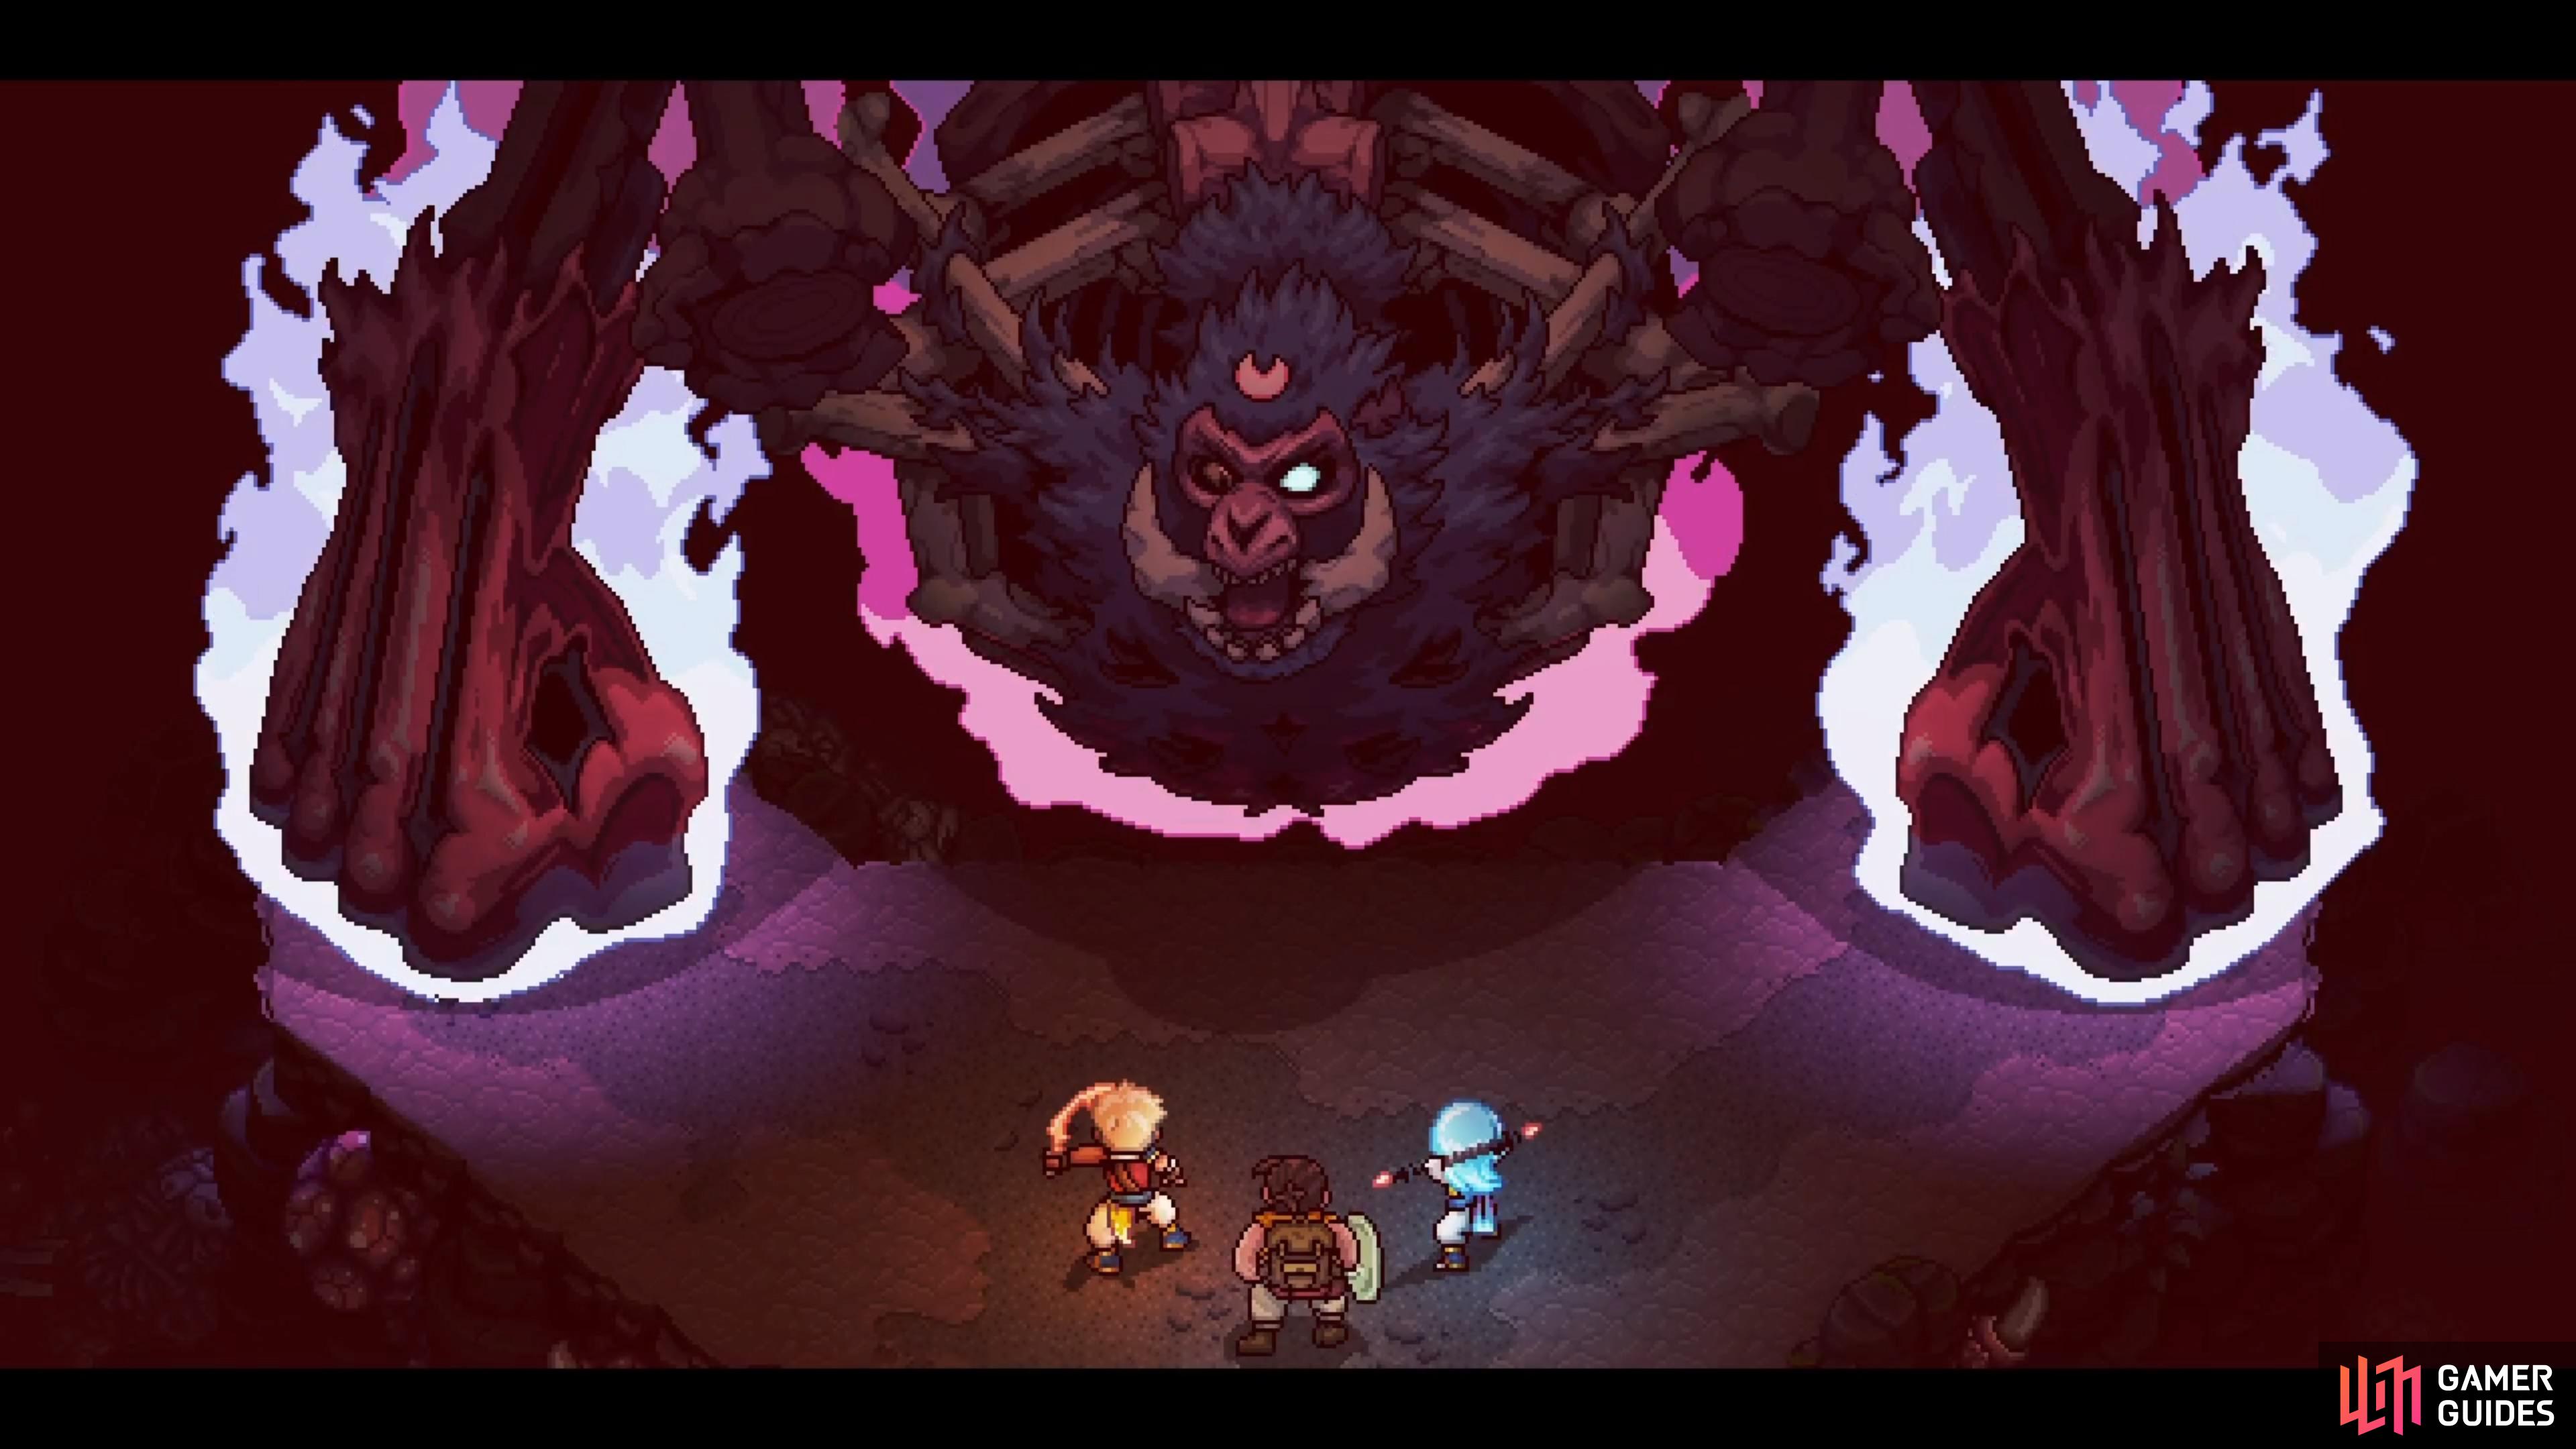 The Dweller of Torment can be a tricky boss, if you don’t know what to do.